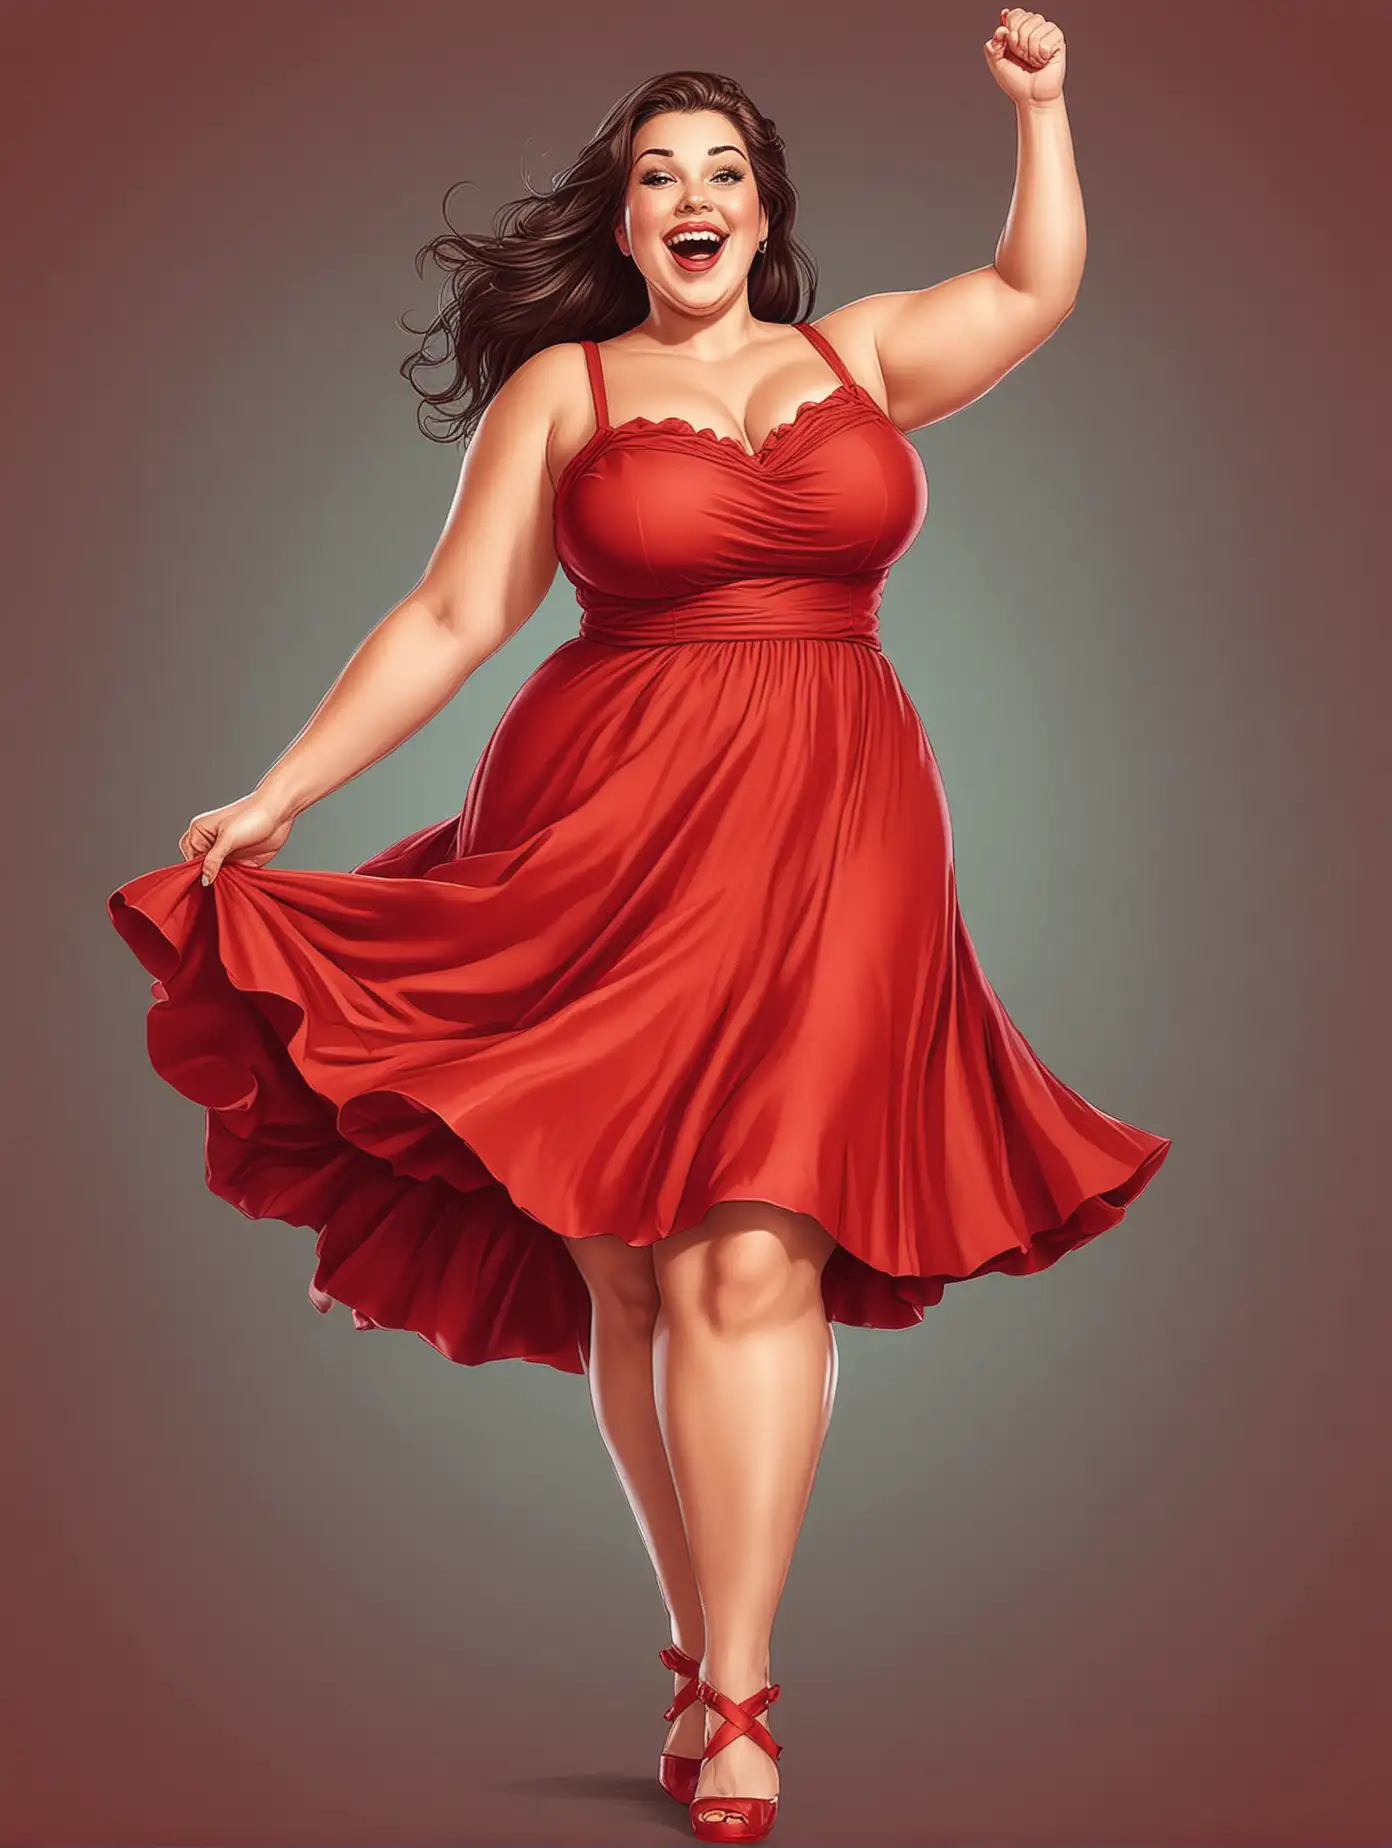 Happy Super Size Woman in Red Dress